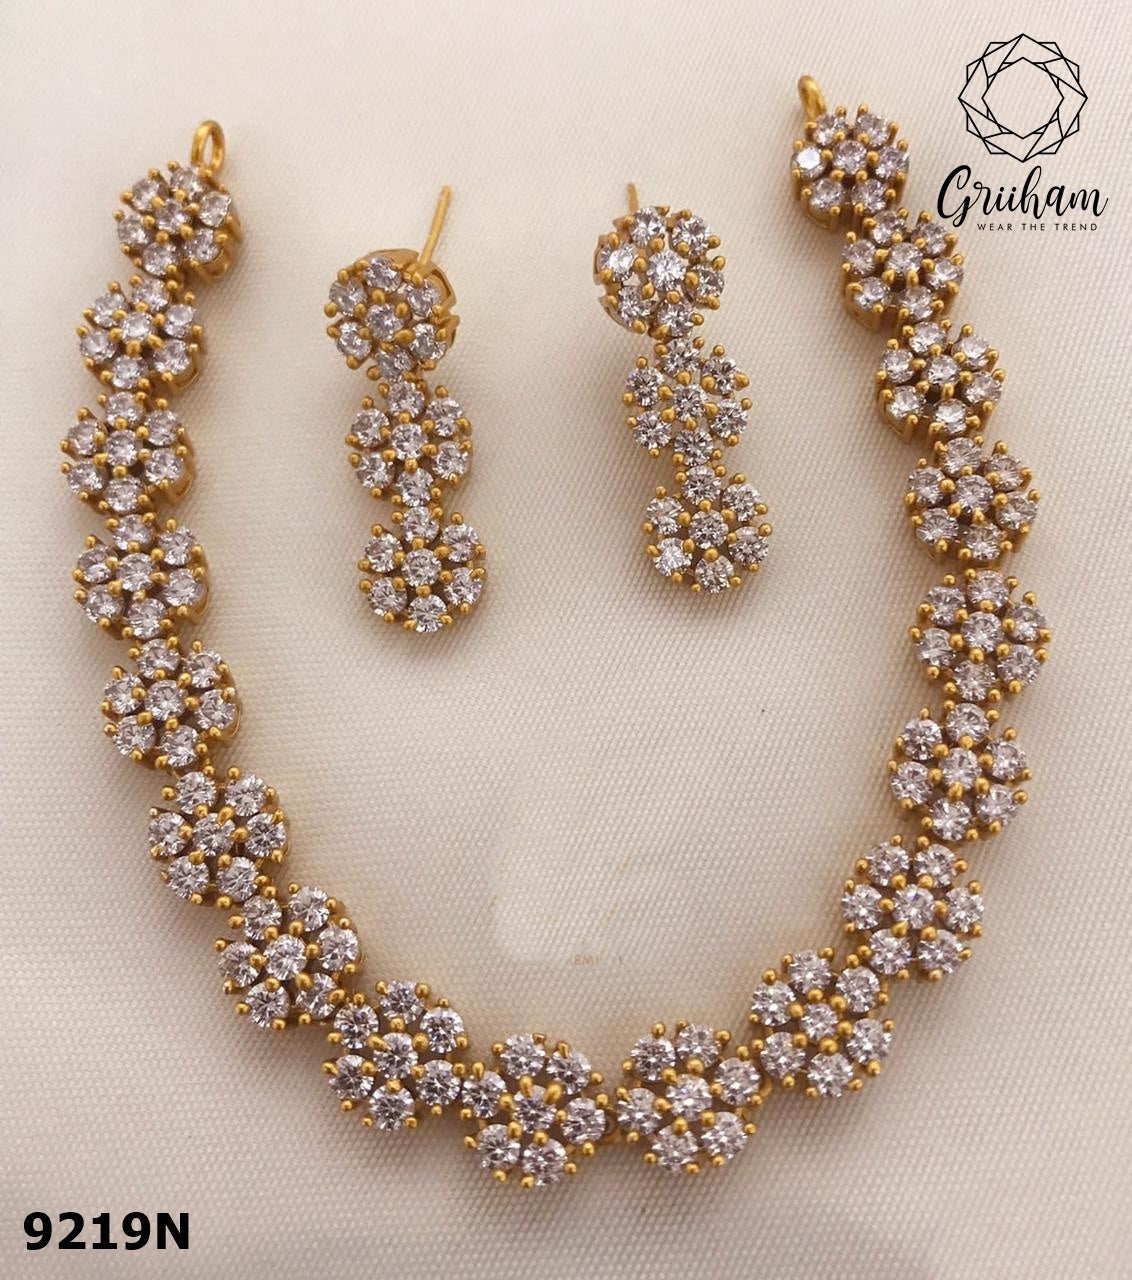 Premium Gold Plated Floral Necklace Set with diff Colours big stones 9217N-Necklace Set-Griiham-White-Griiham